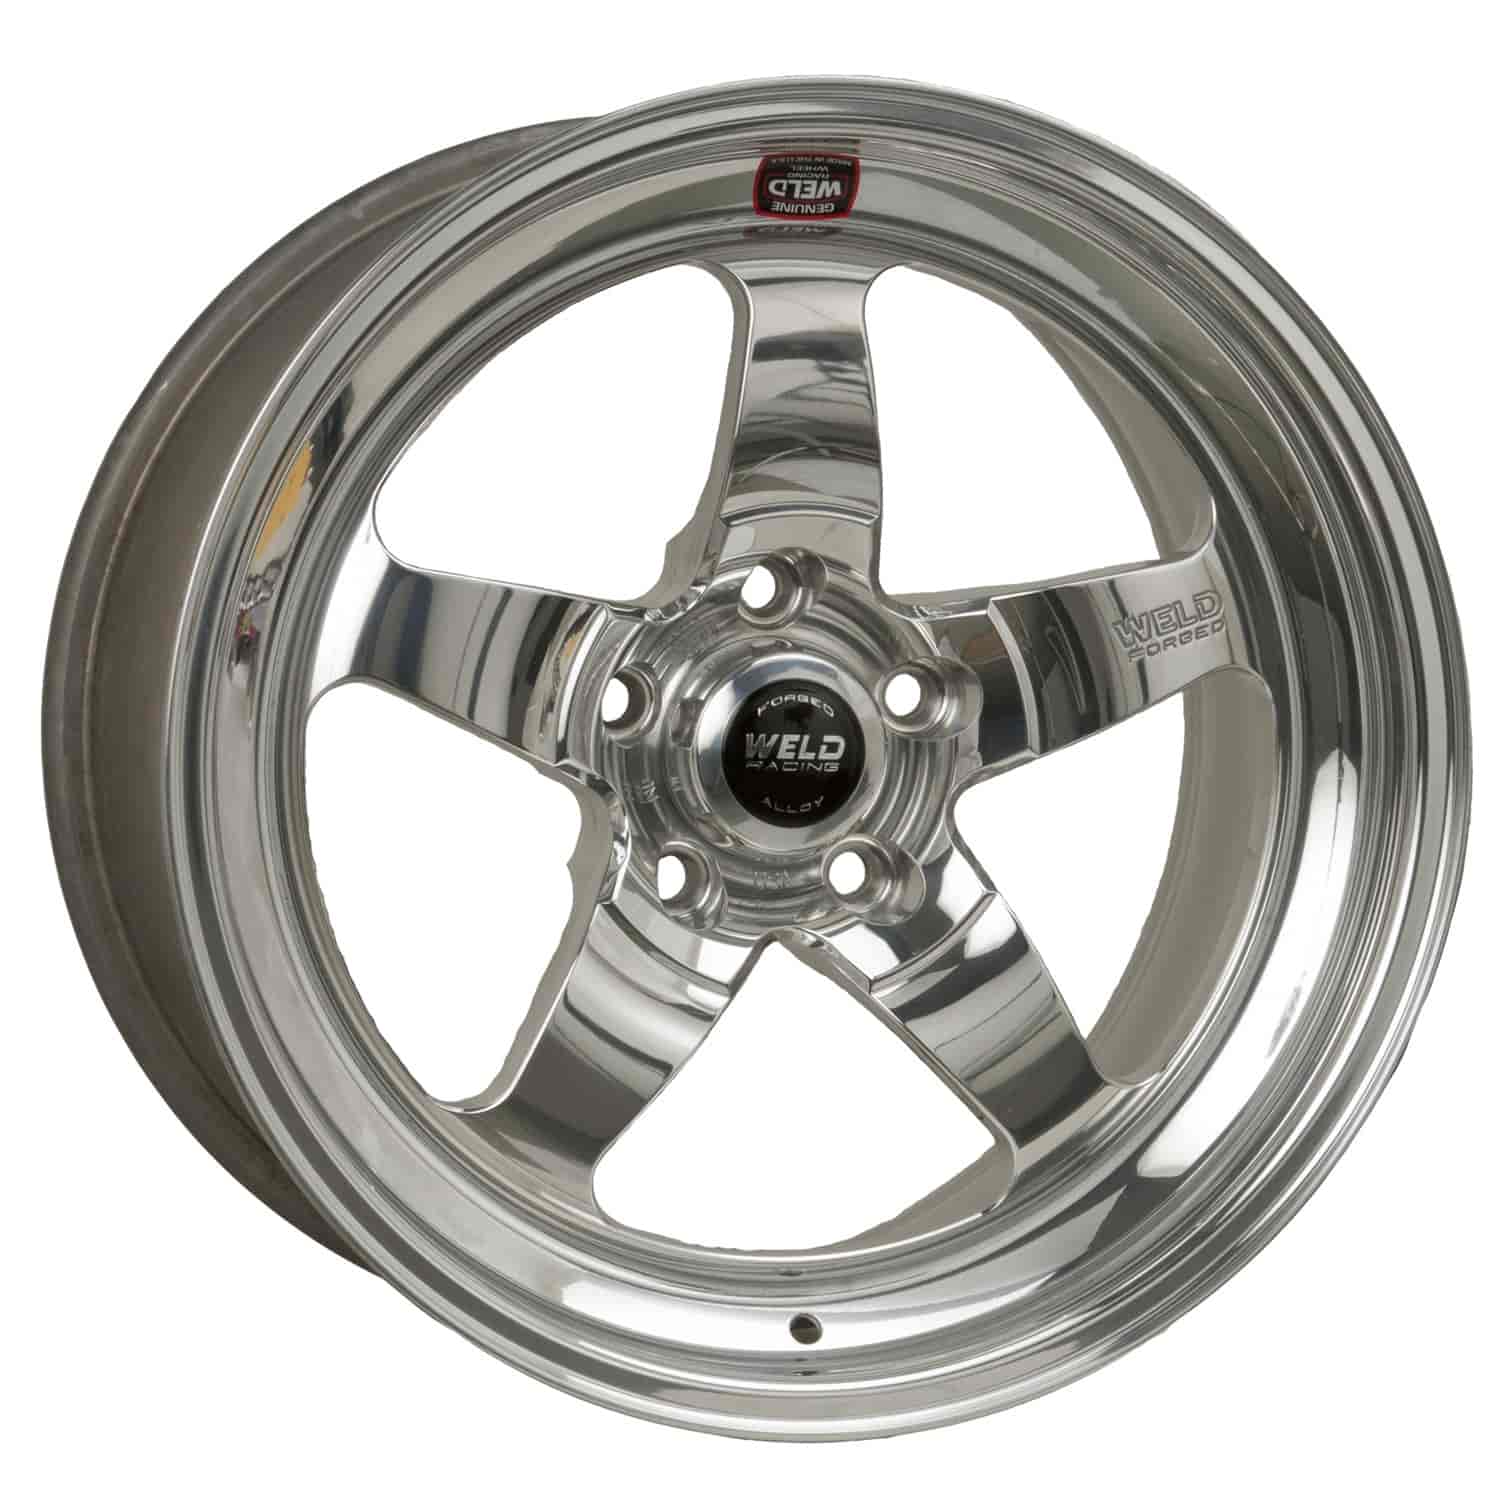 RT-S Series Wheel Size: 17" x 5" Bolt Circle: 5 x 115mm Rear Spacing: 2.20" Polished